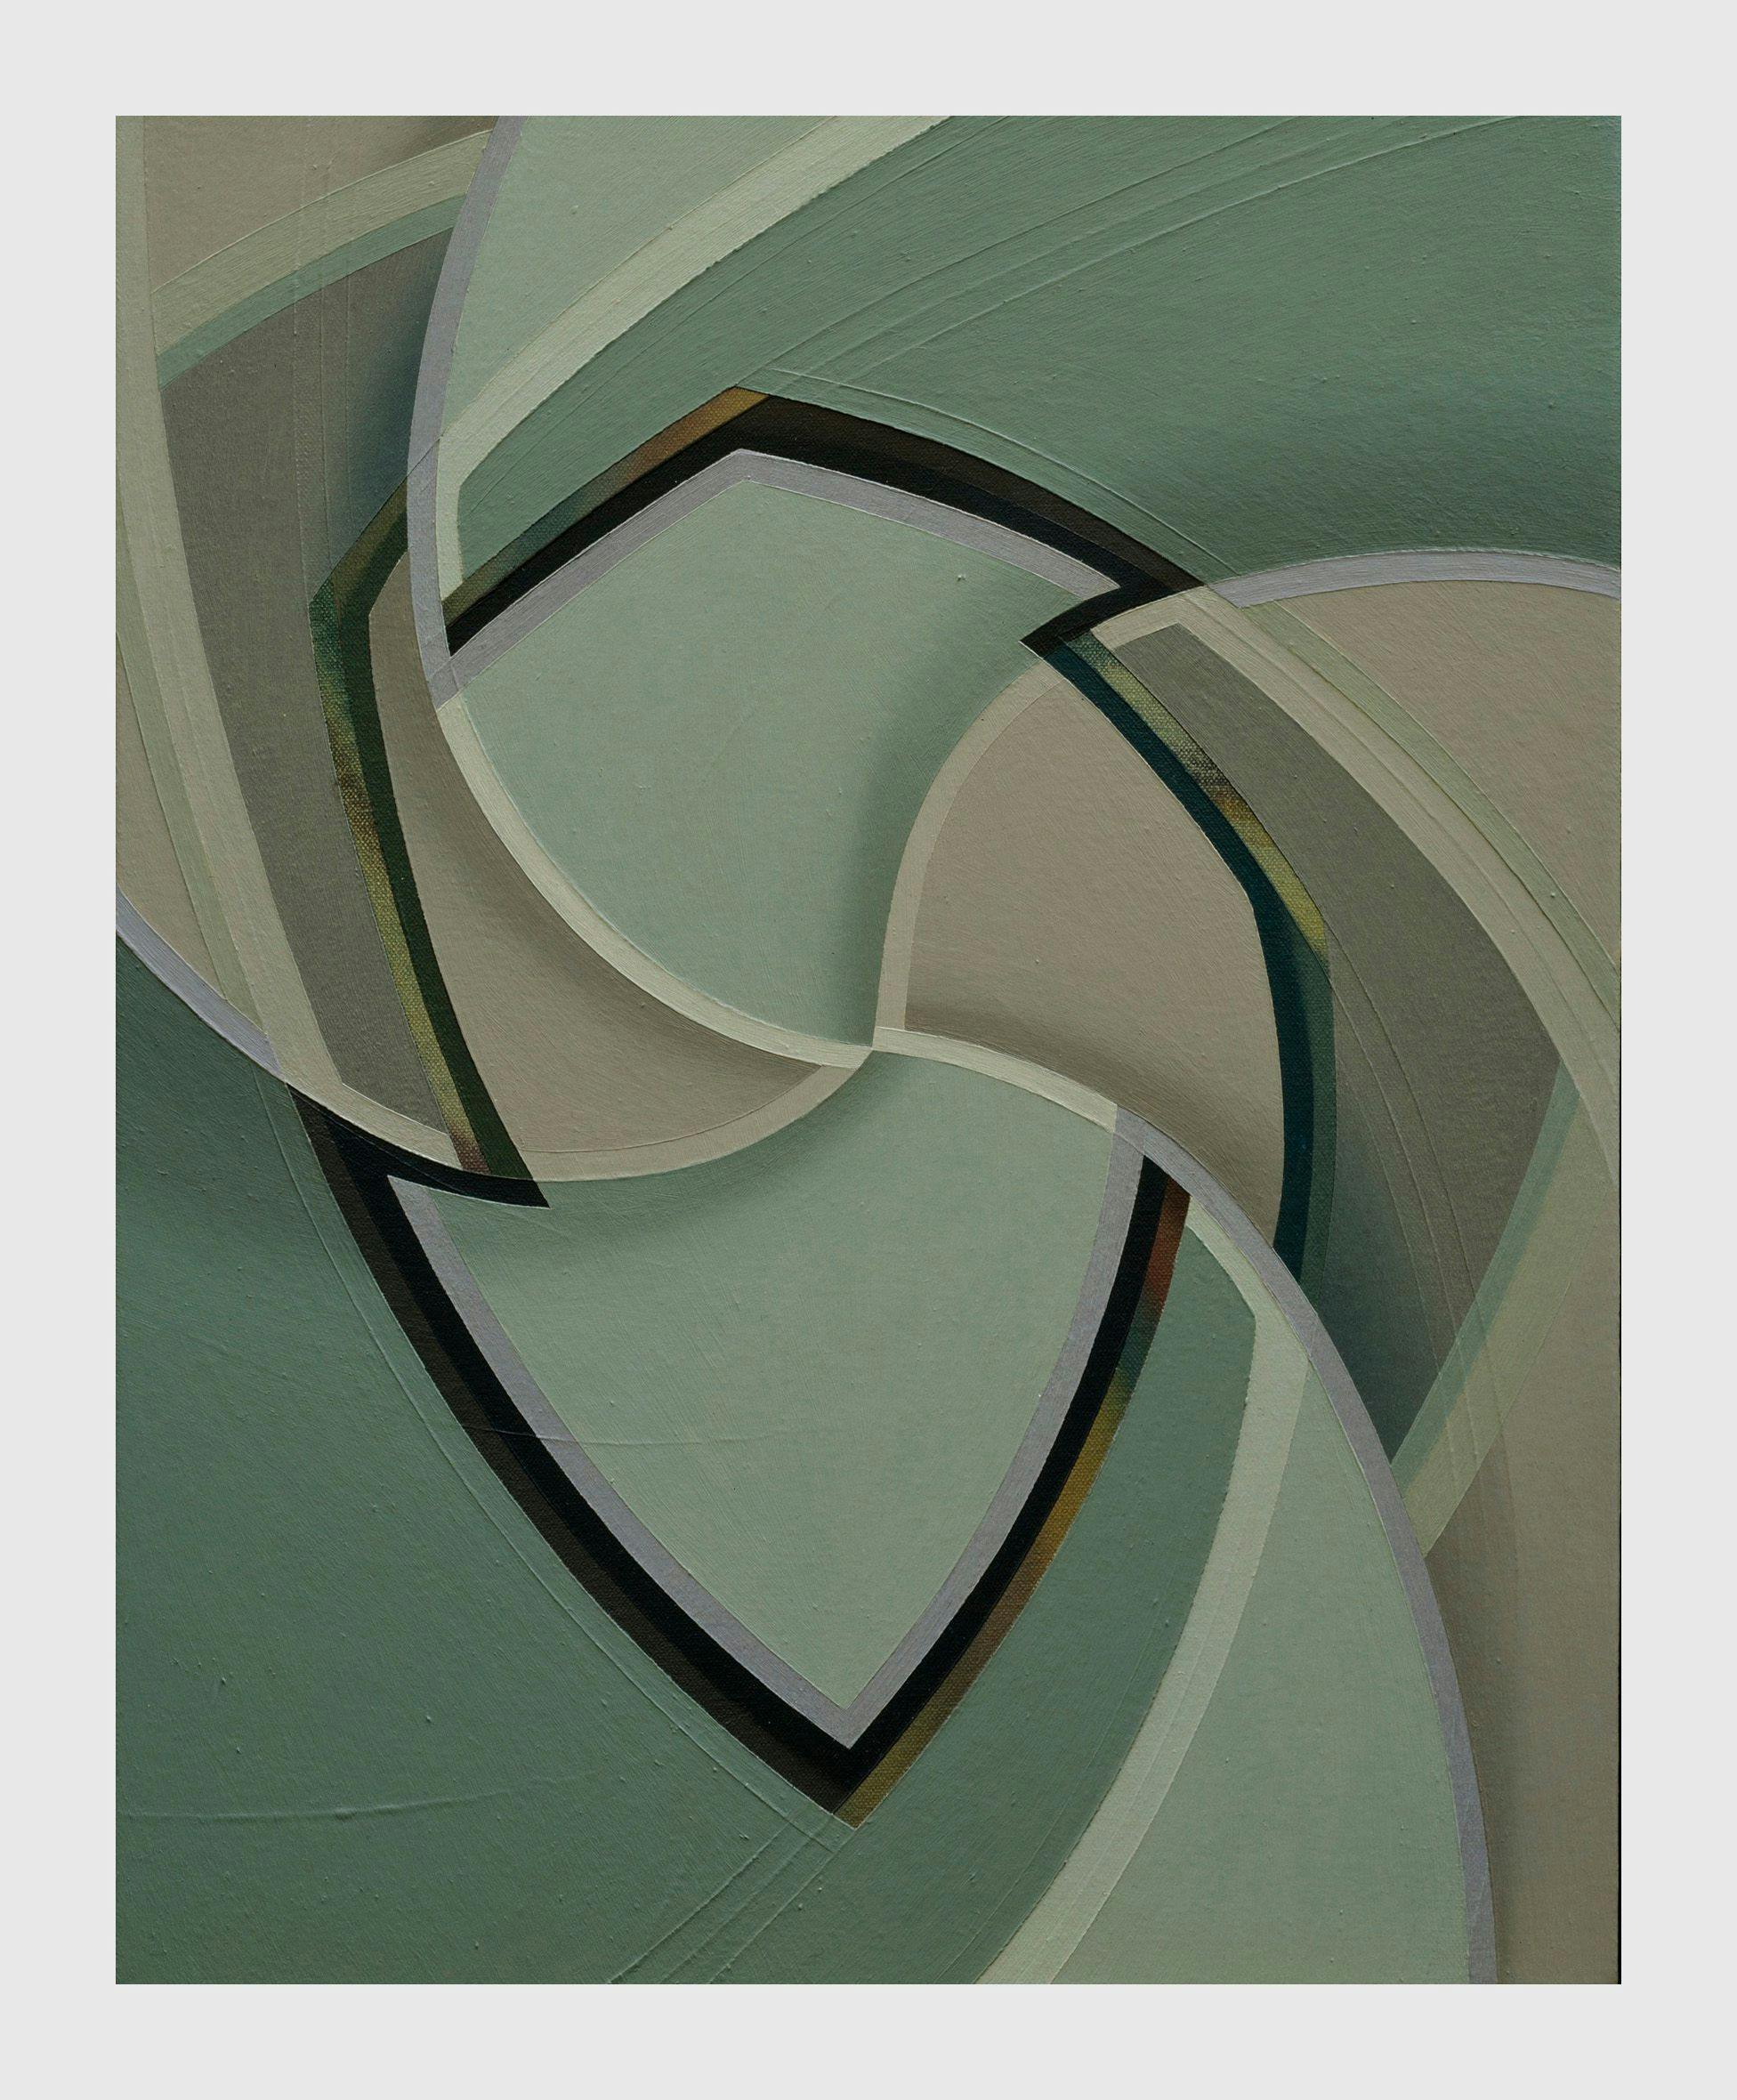 A painting by Tomma Abts, titled Ert, dated 2003.